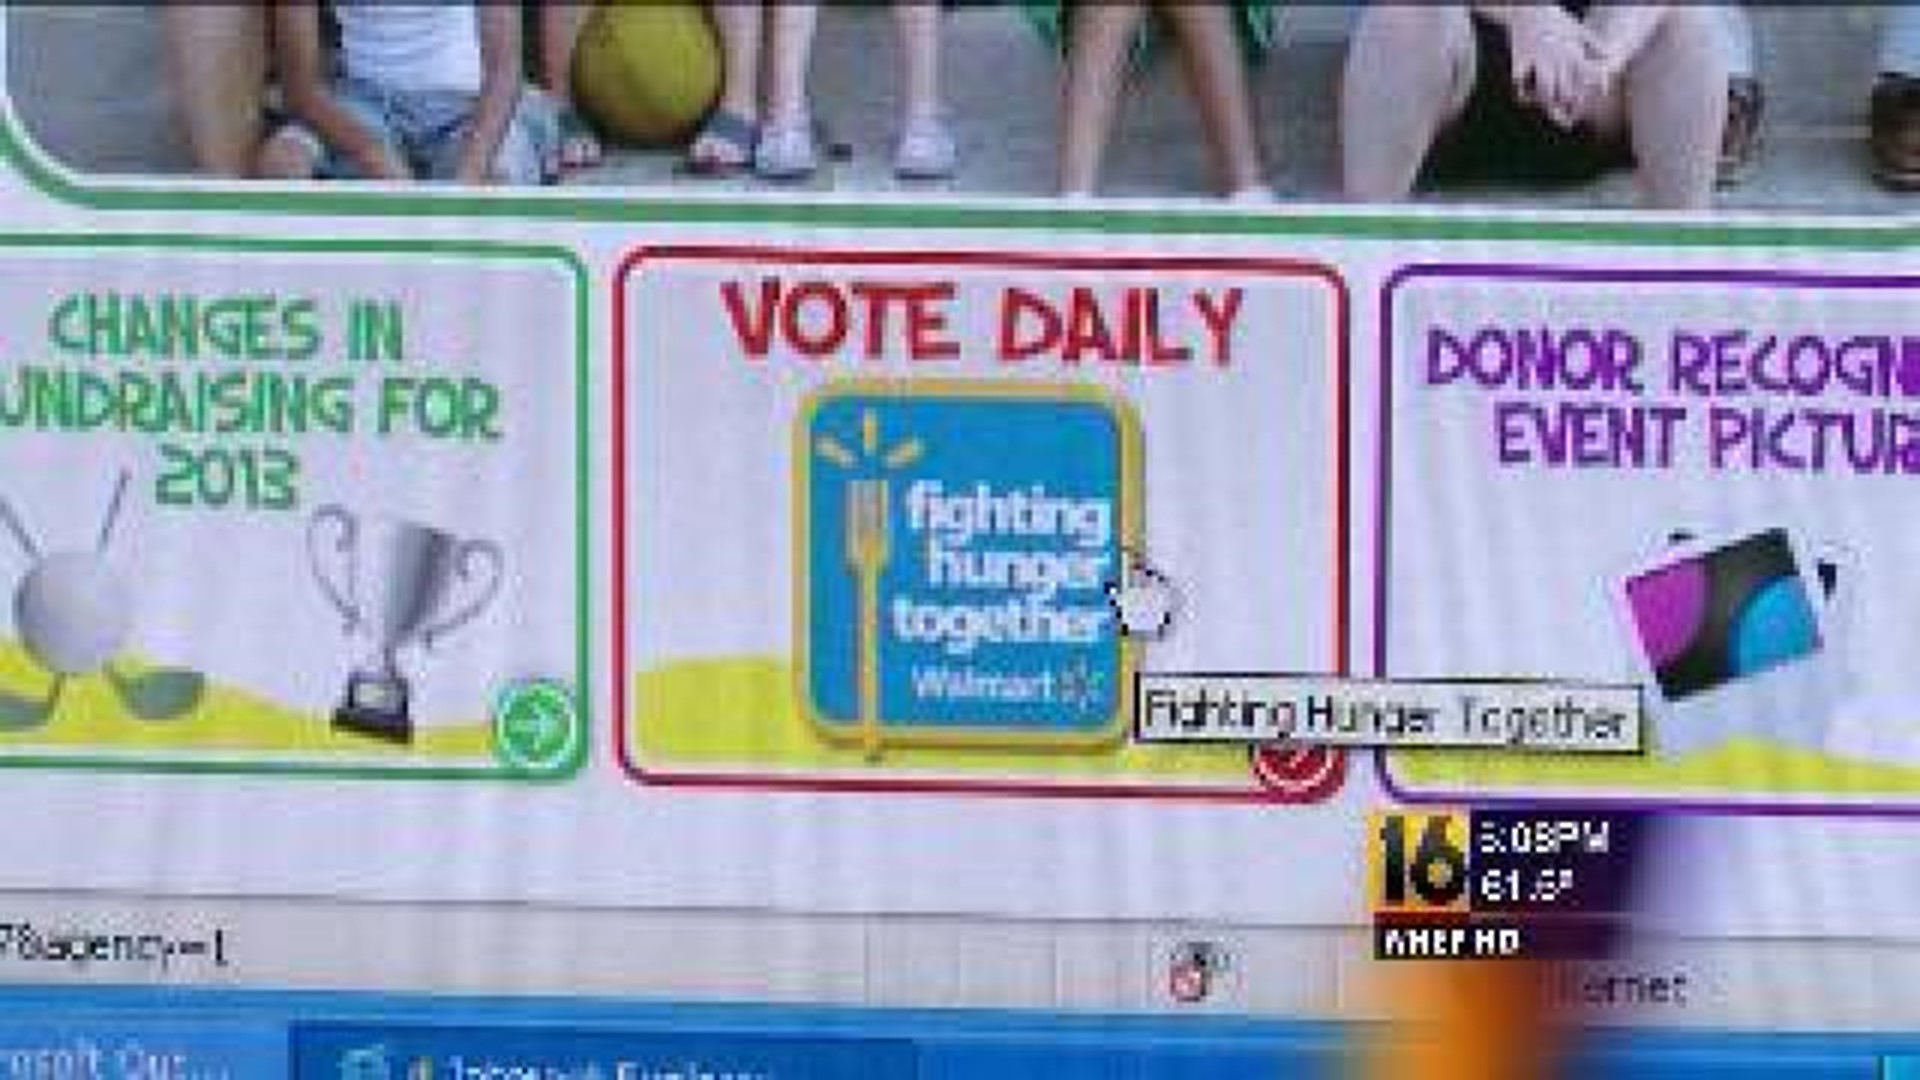 Boys & Girls Clubs Seeking Votes for Food Grant